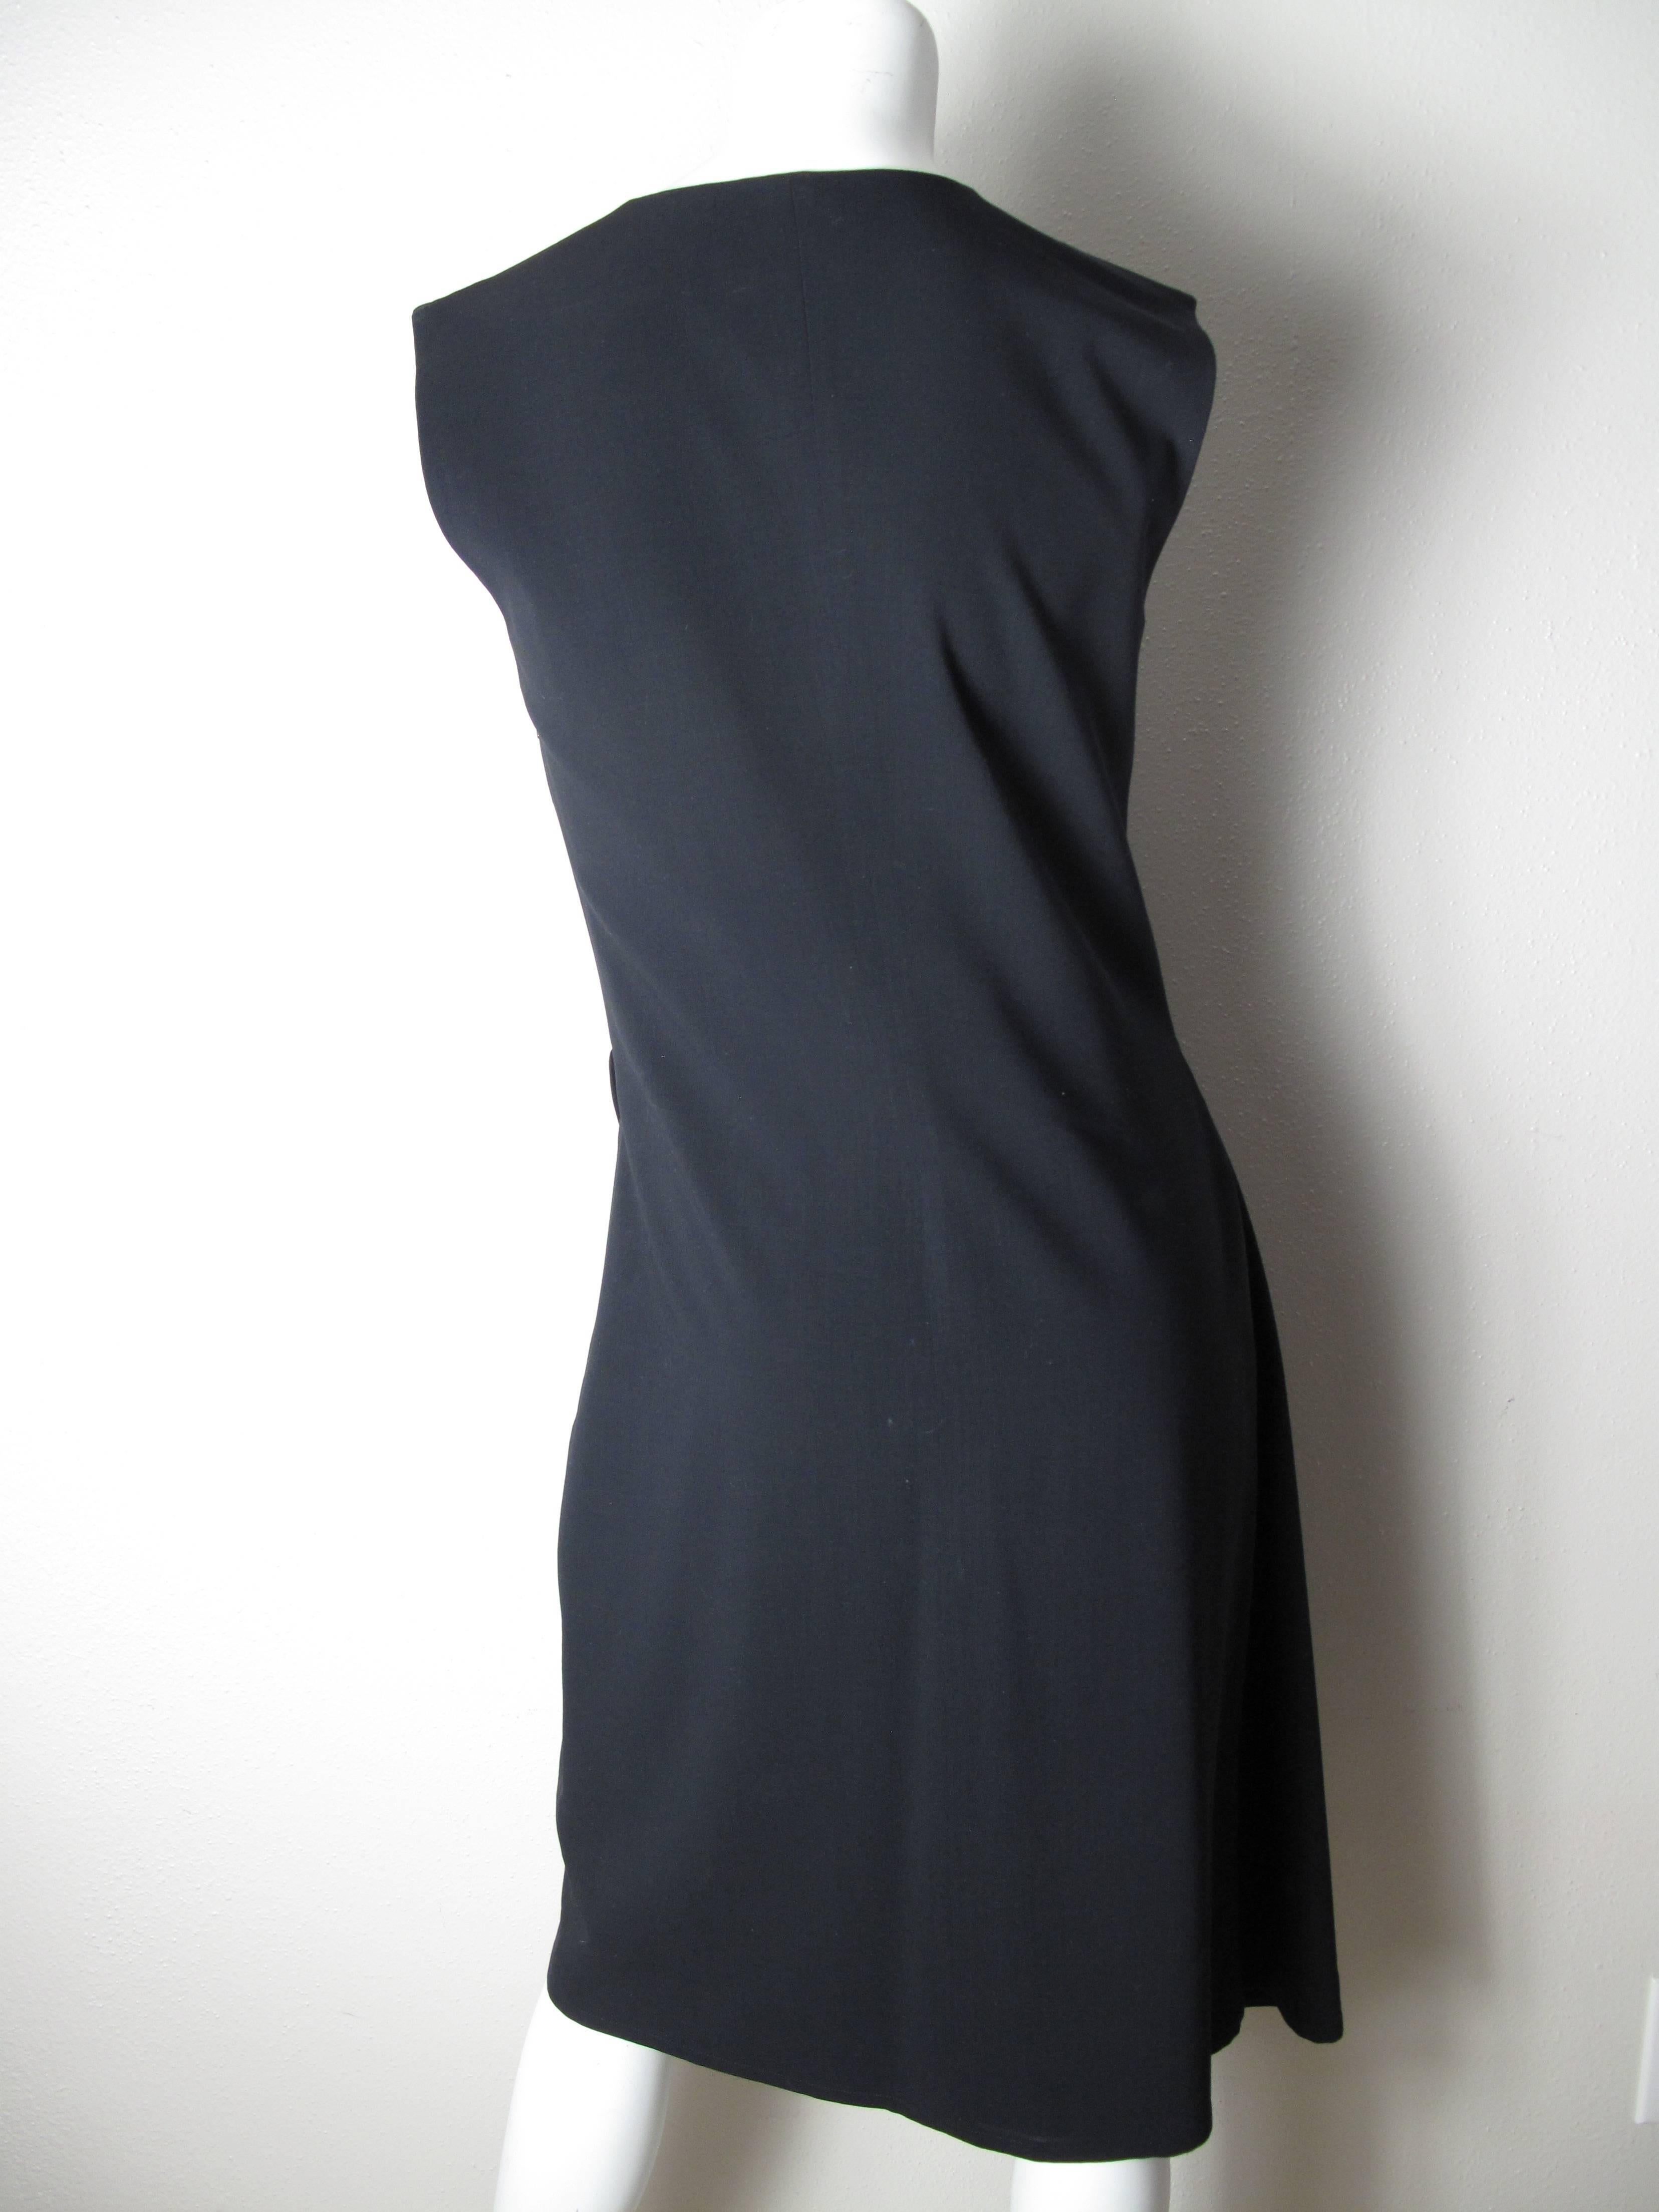   Jil Sander navy wool gabardine sleeveless dress, wrap/tie ½ front, Size 38.
Condition: Excellent. Zipper on side.
We accept returns for refund, please see our terms. We offer free ground shipping within the US. Please let us know if you have any